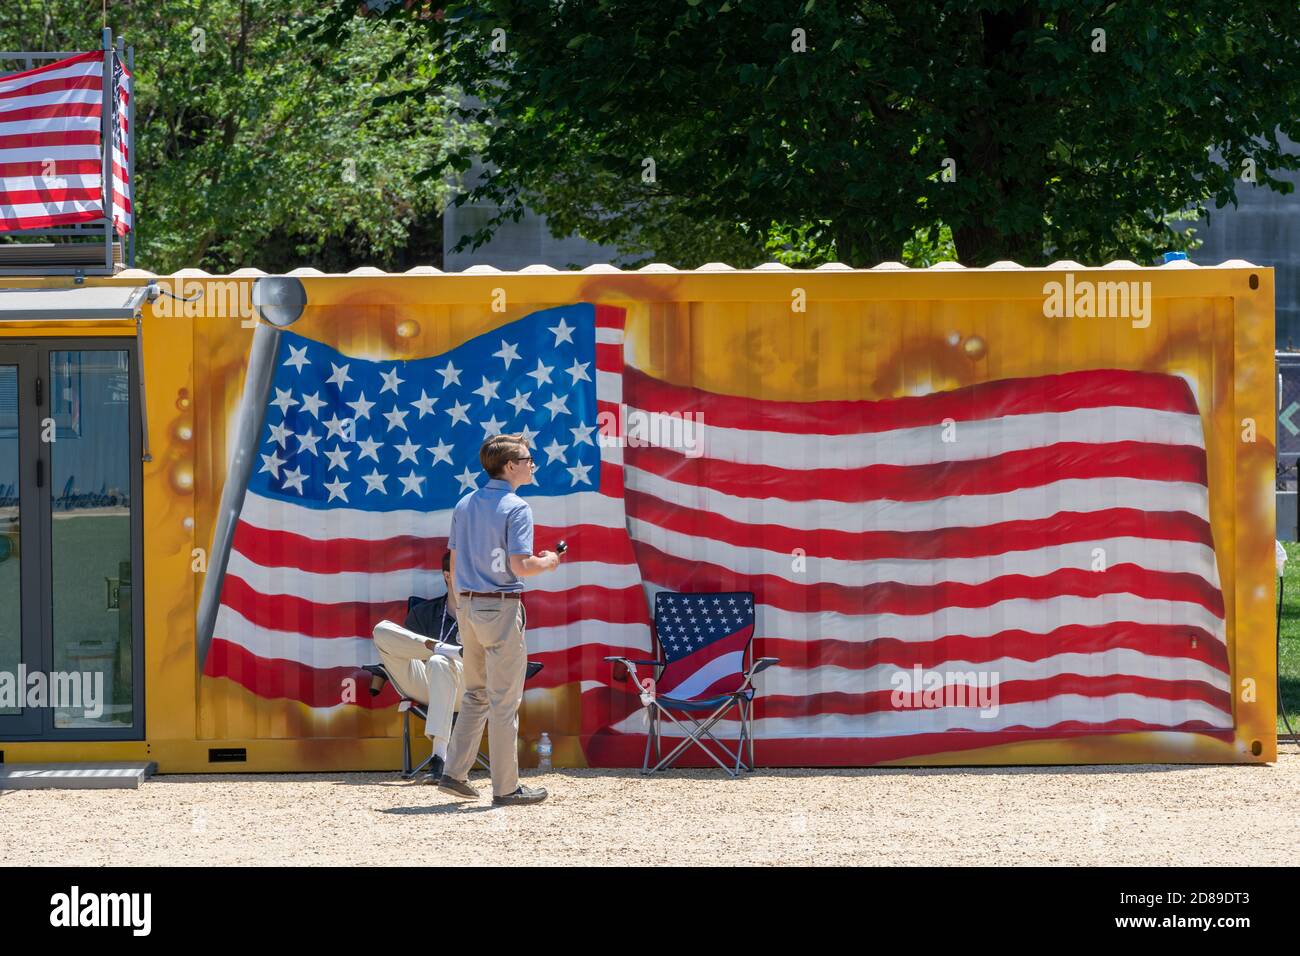 Stars and Stripes - a large US flag painted on the side of a display stand on the National Mall in Washington DC. The flag has only 36 stars. Stock Photo